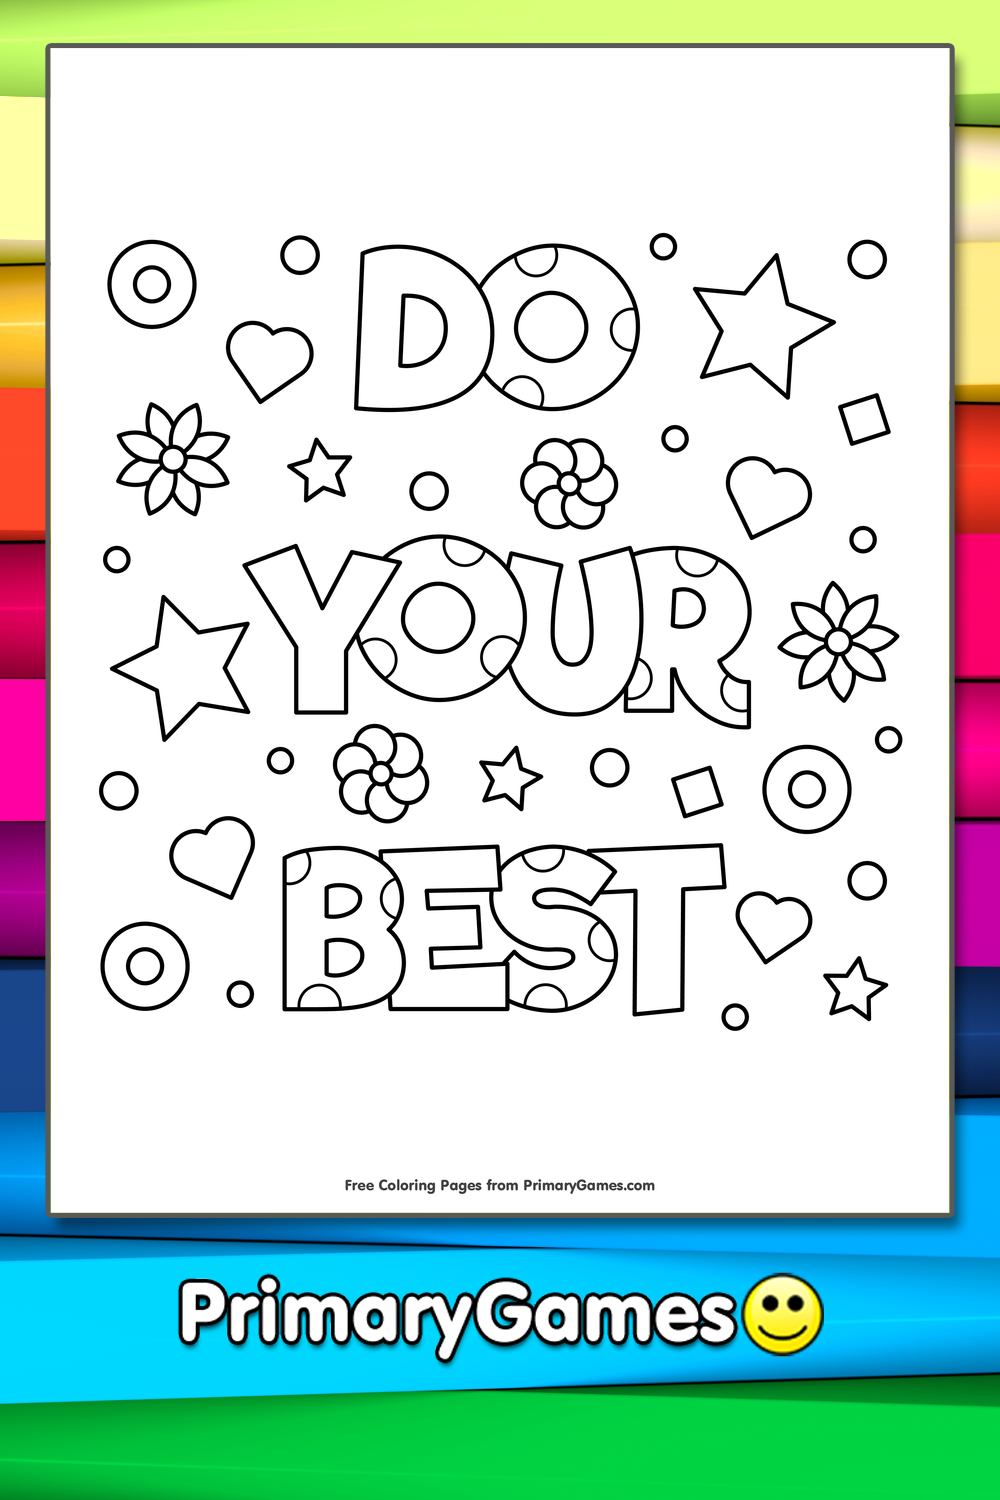 Do Your Best Coloring Page • FREE Printable PDF from PrimaryGames